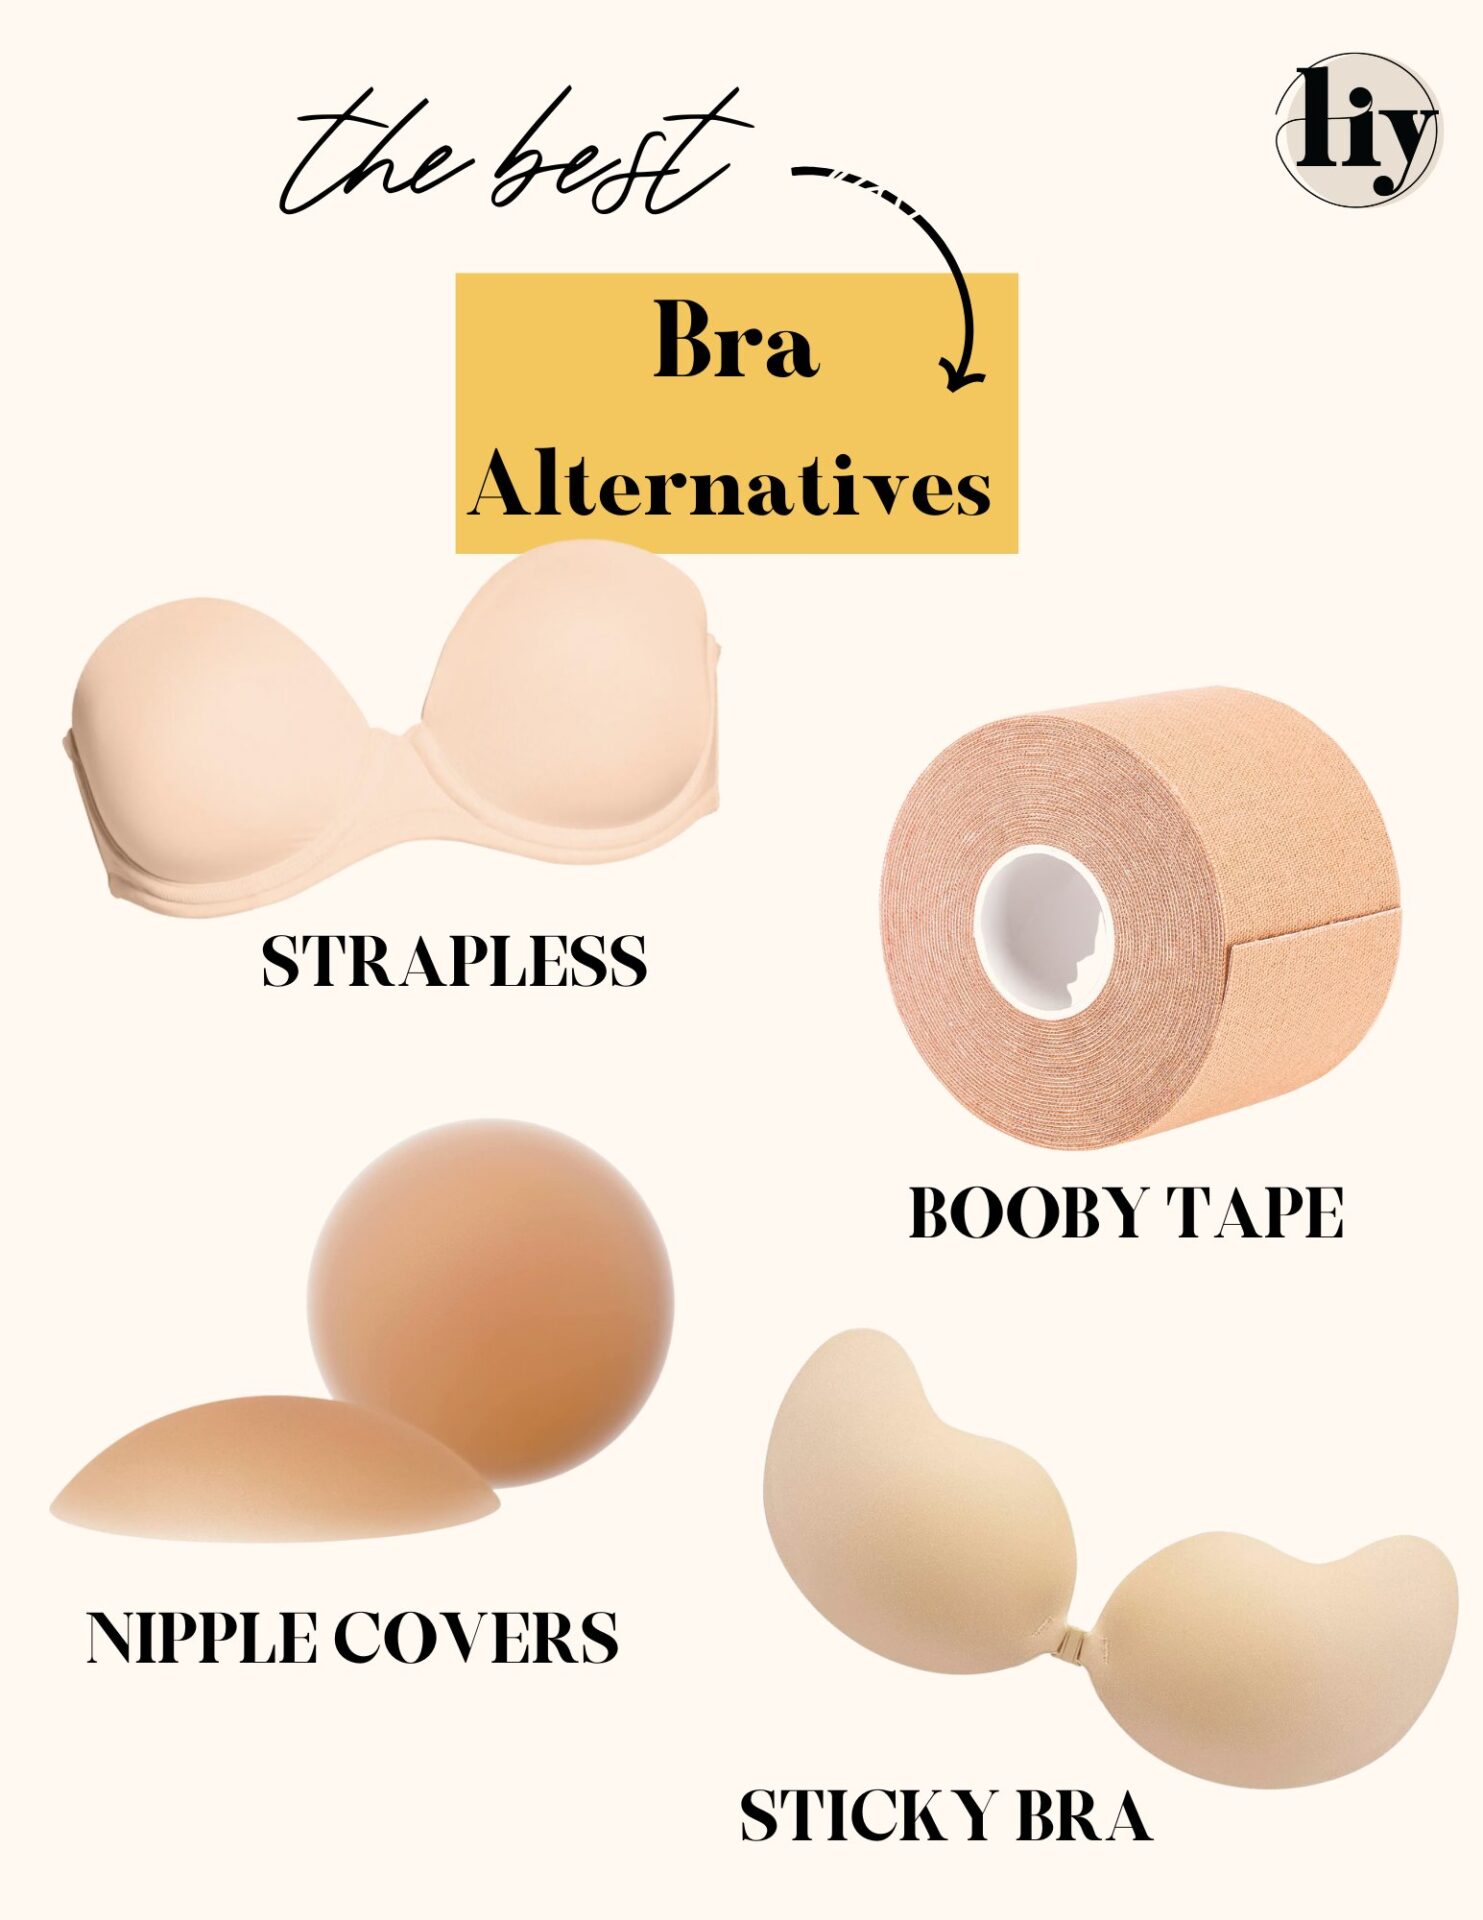 I'm Ditching My Strapless Bras for These 18 Well-Reviewed Alternatives